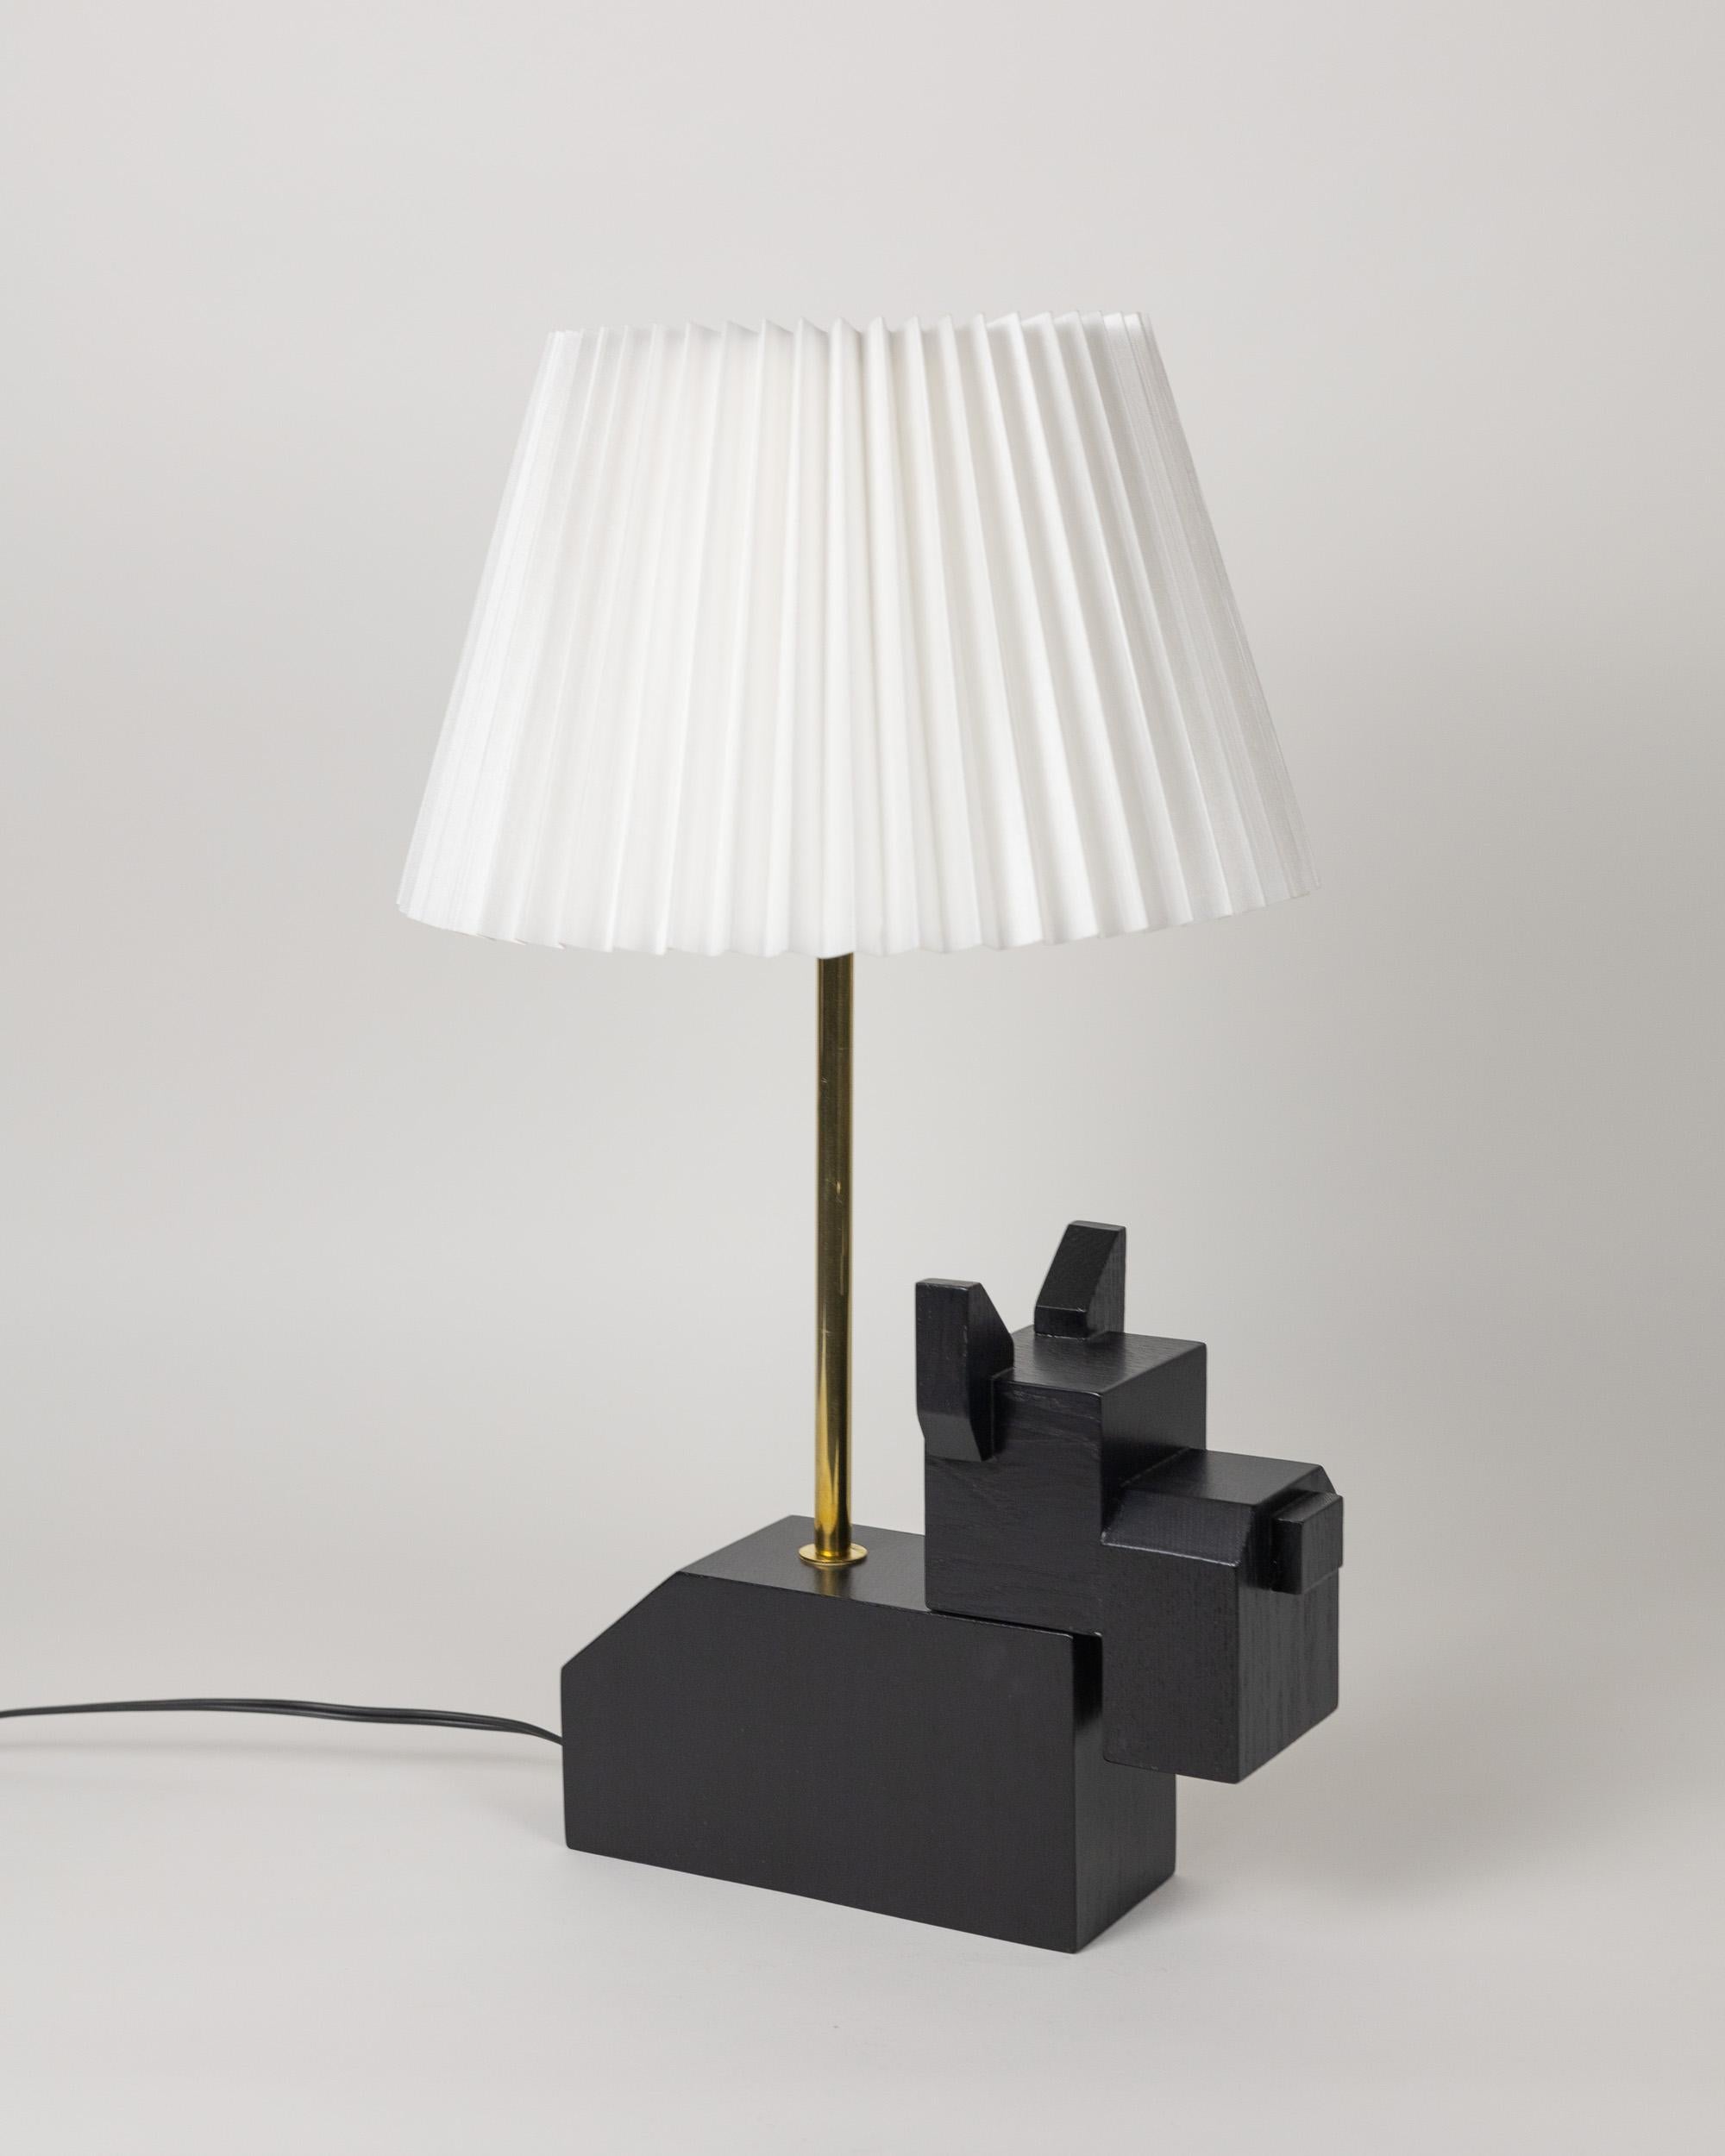 Contemporary In-stock, Black Doggy Lamp, Wood Black Table Light with White Pleated Shade, Dog For Sale